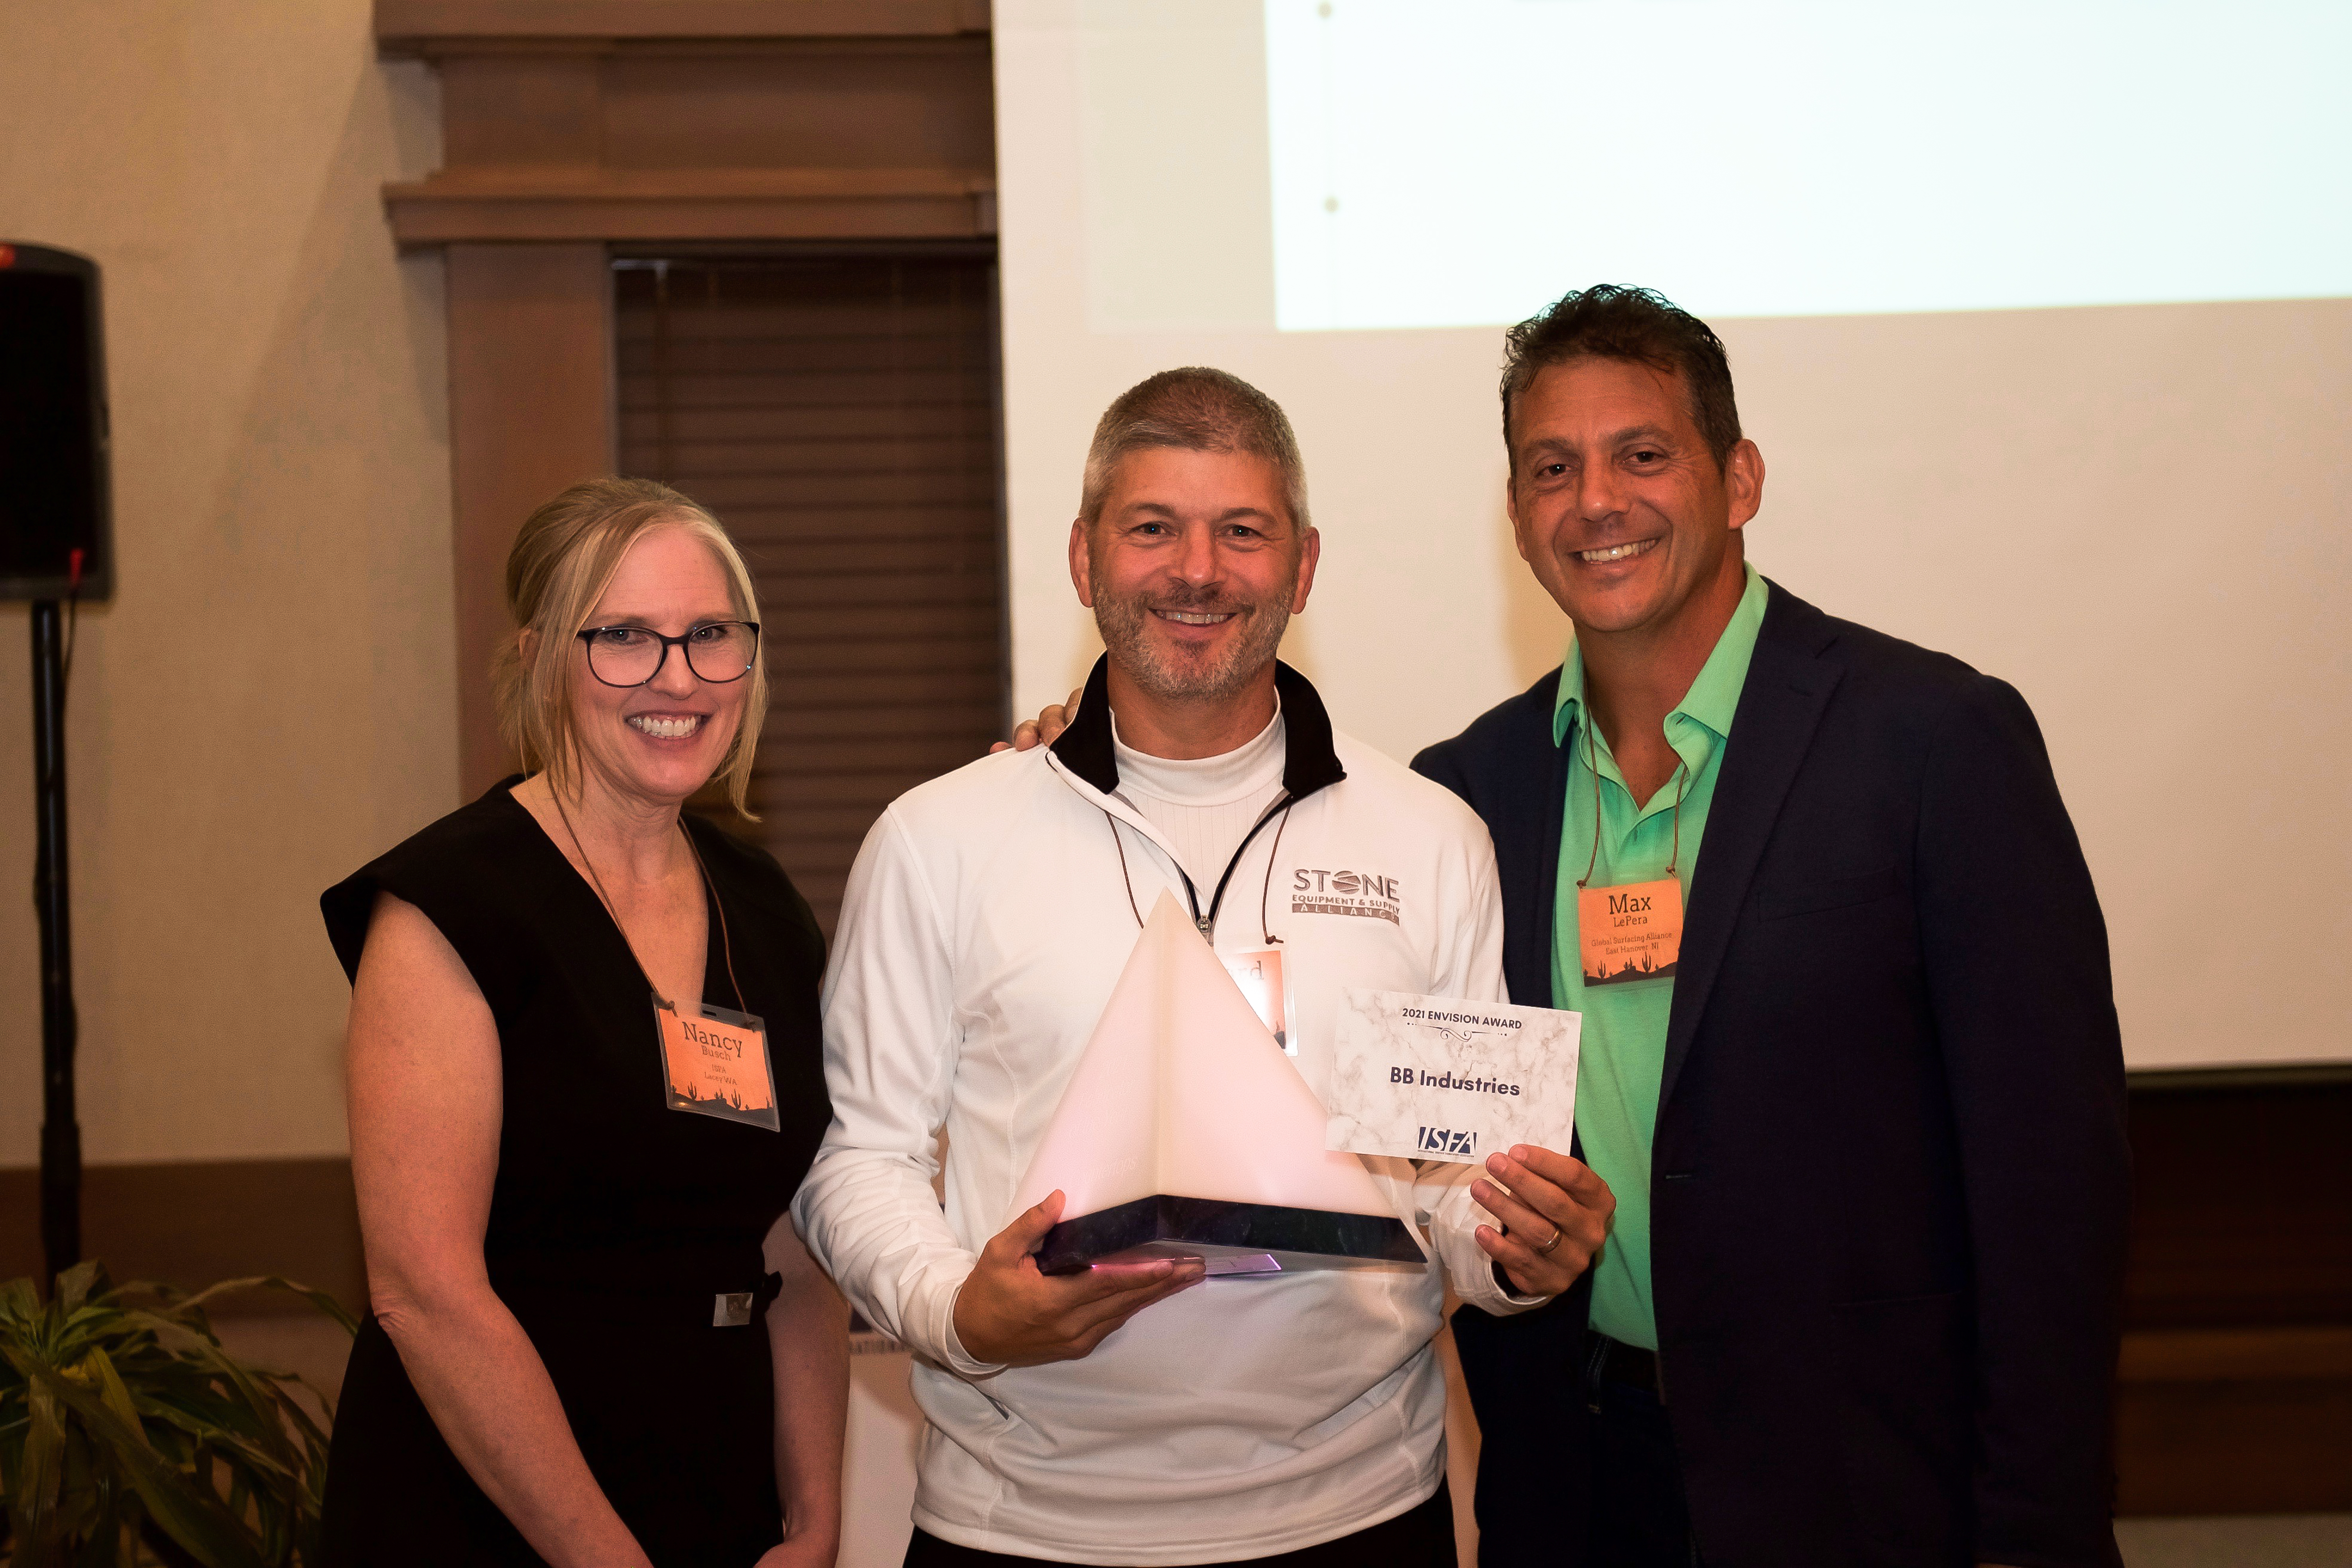 Rick Stimac, BB Industries, accepts the 2021 Envision Award from Nancy Busch, executive director, and Nancy Busch and Paul "Max" Le Pera, director at the ISFA Annual Conference. 